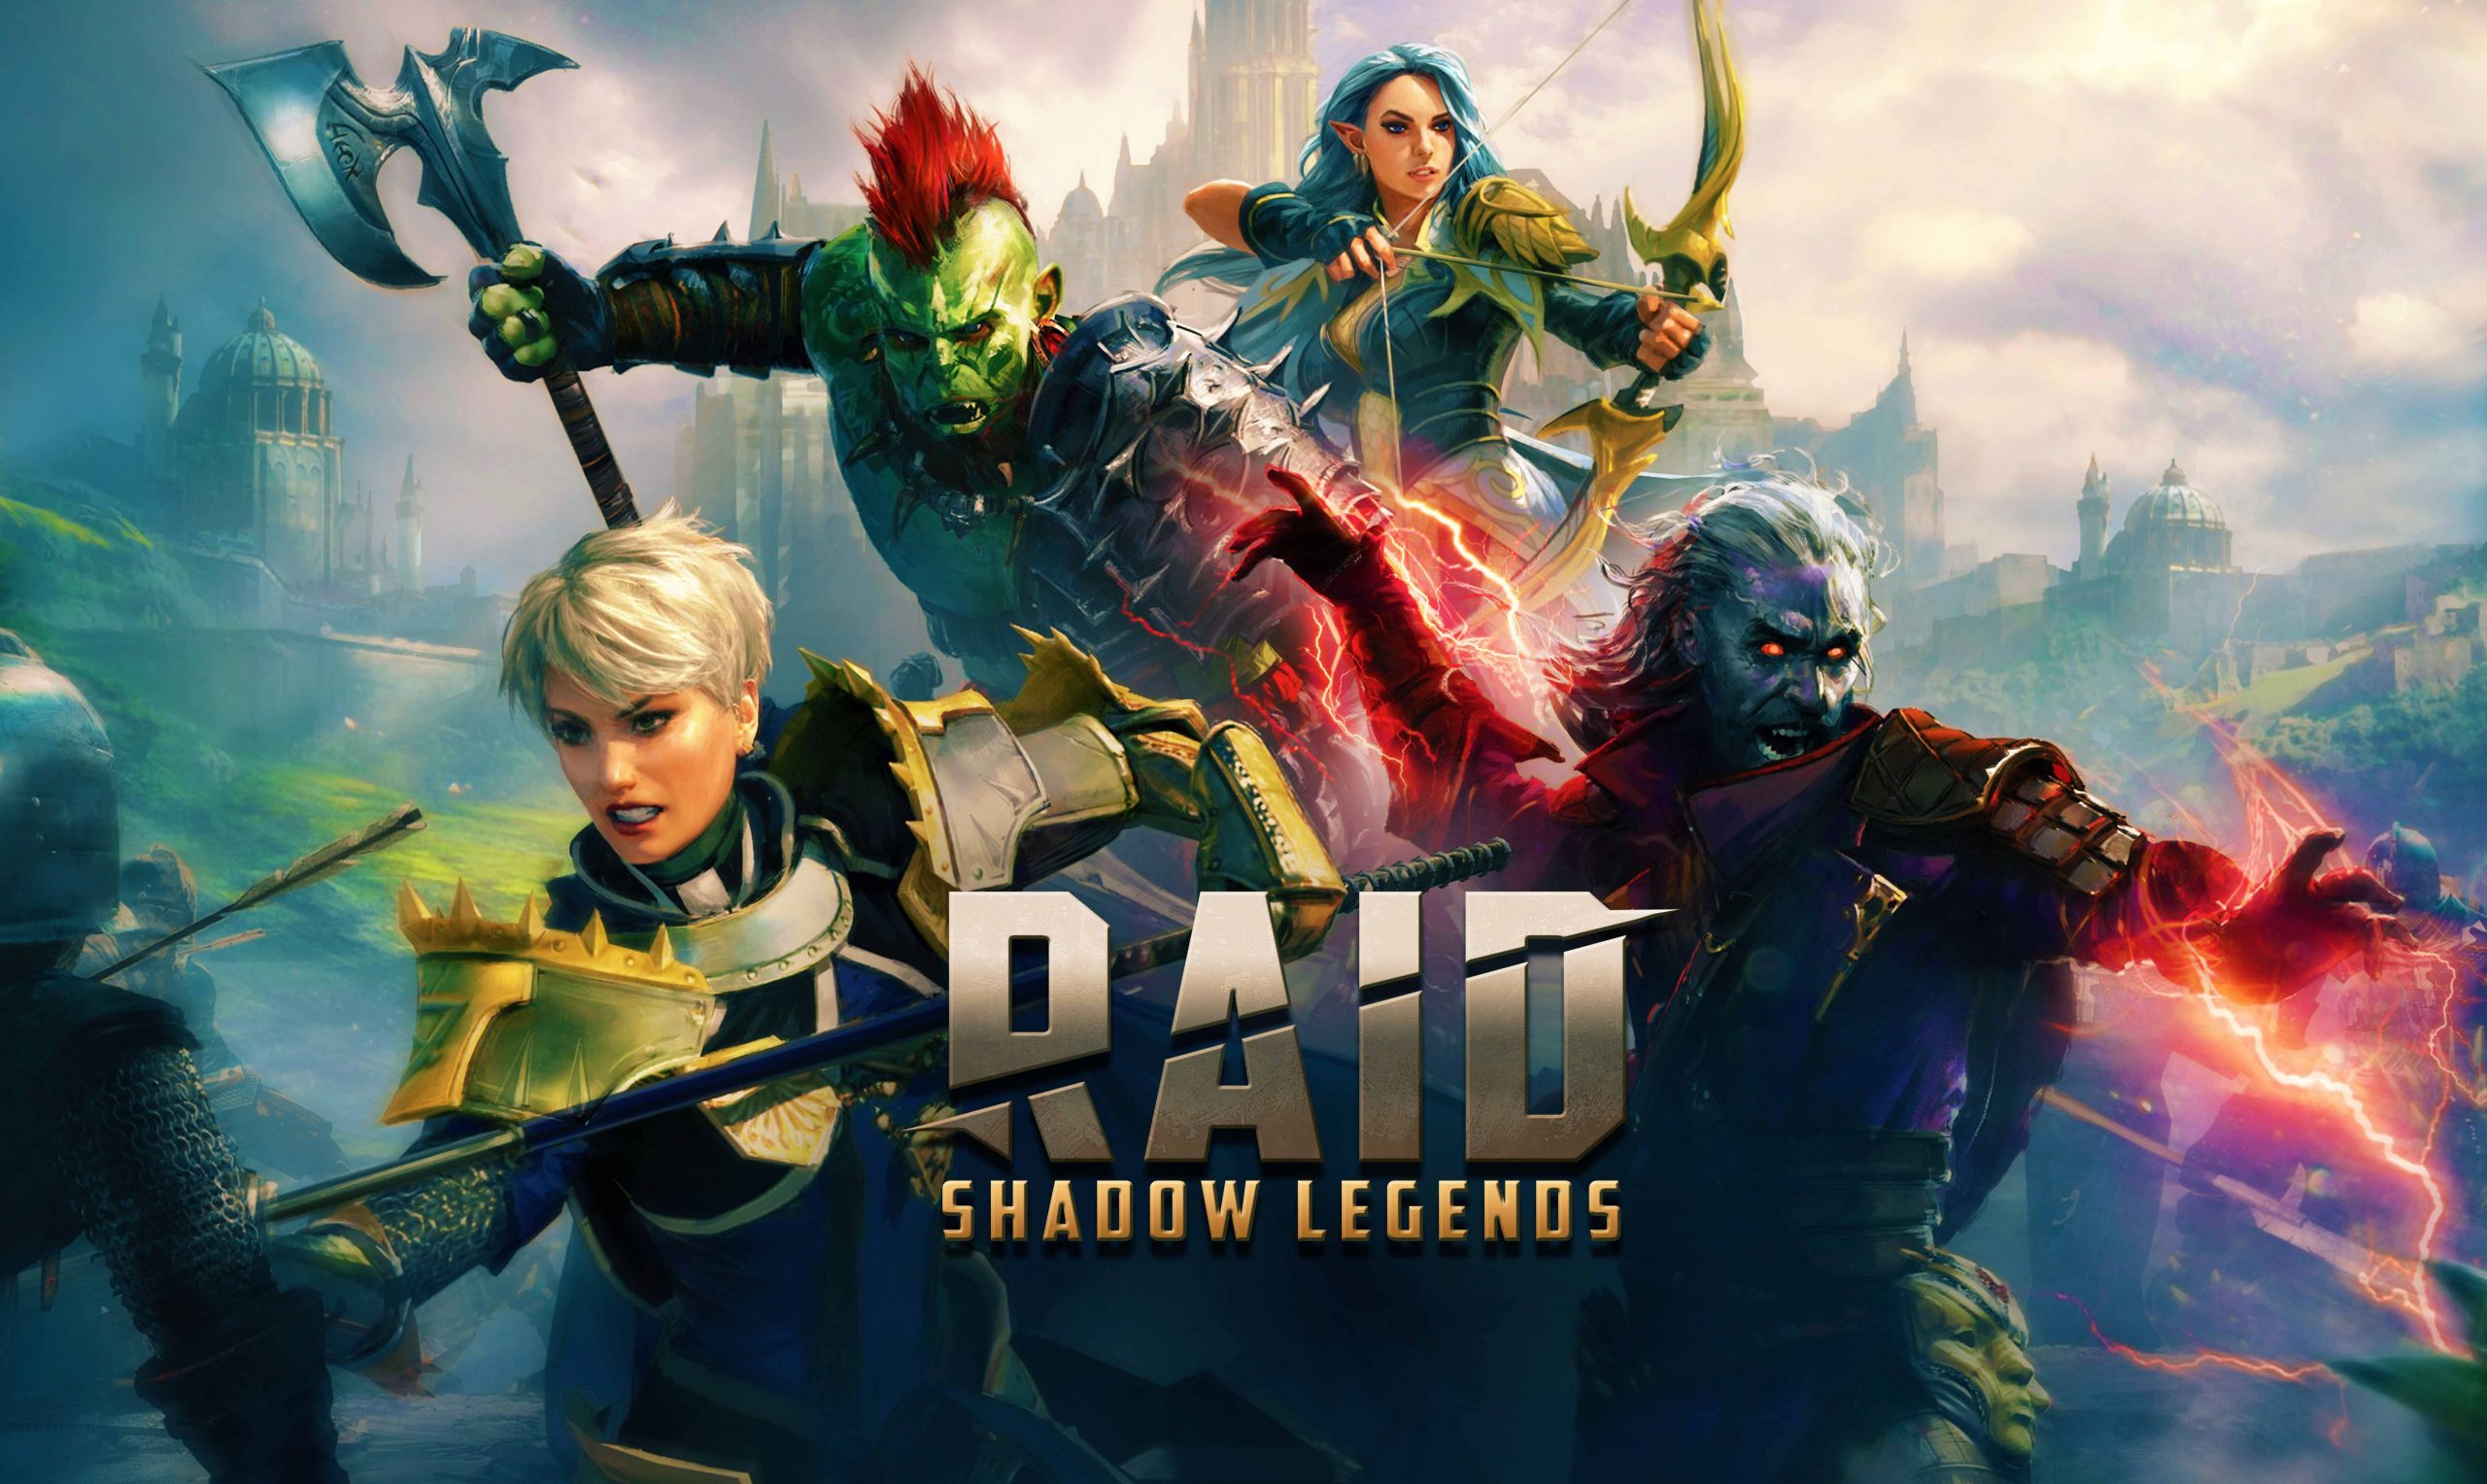 raid shadow legends is a free to play